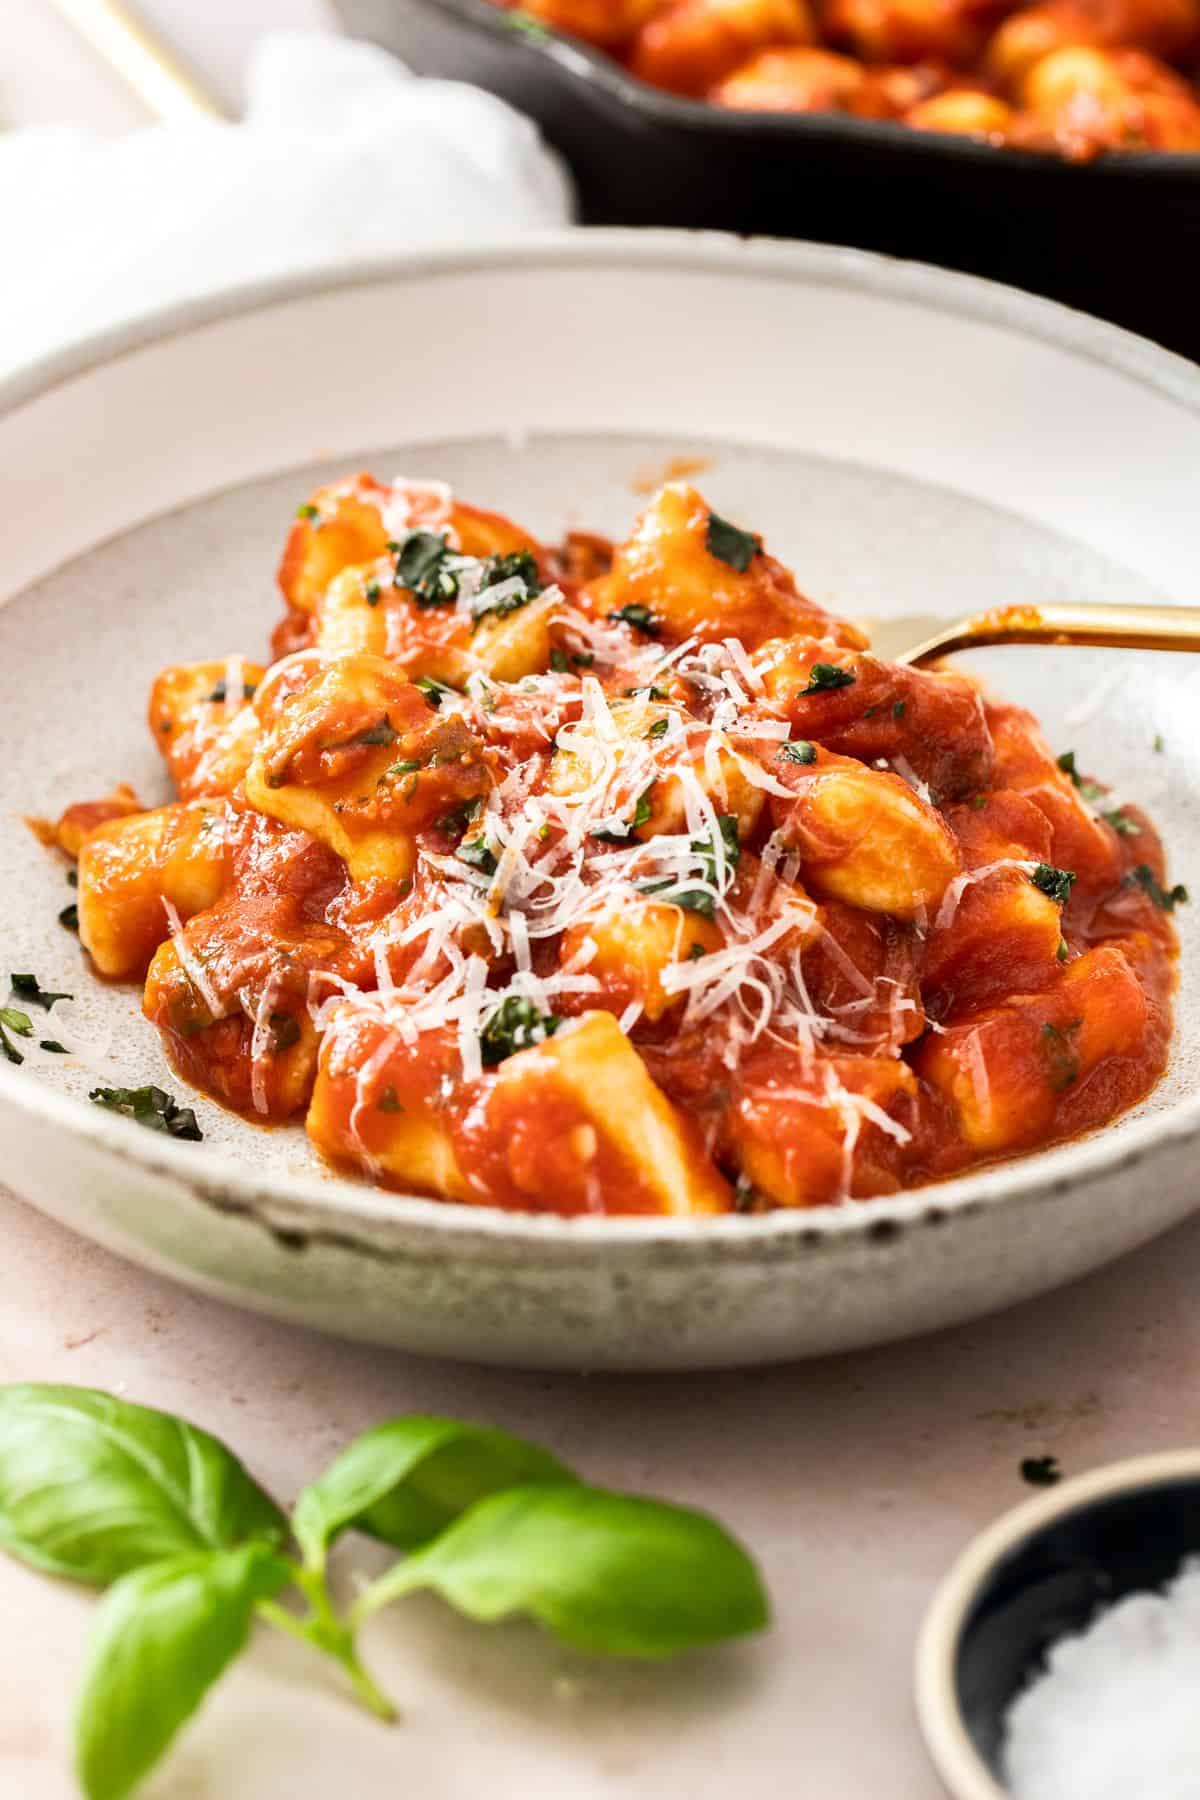 Dish with a serving of gnocchi in tomato sauce, garnished with some grated Parmesan cheese.